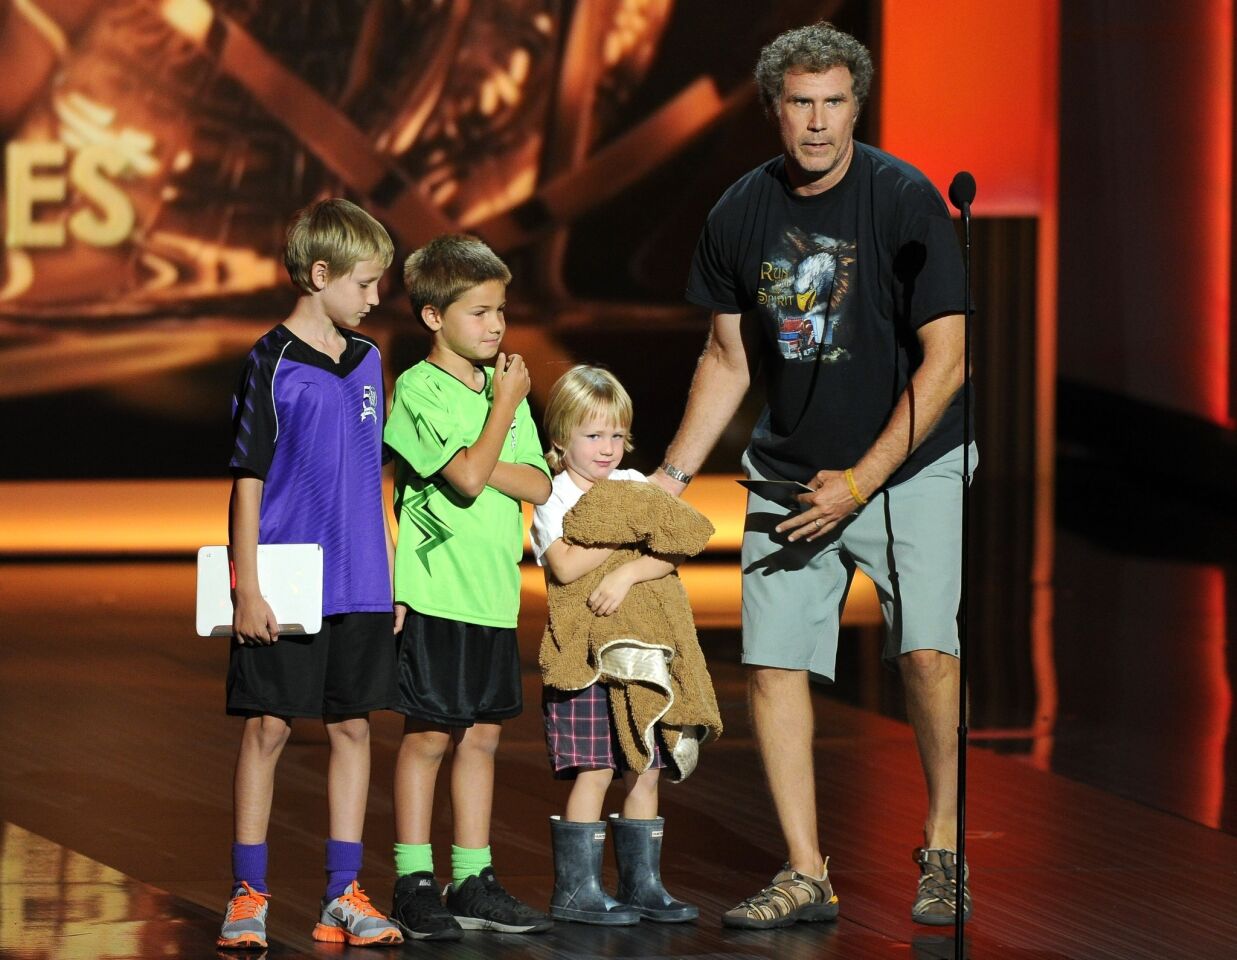 The final few minutes of any marathon awards show can find most people a little punchy. Maybe that's why Will Ferrell's bit about coming on stage in shorts and T-shirt with his three kids in tow went over so well. Claiming that he was a last-minute presenter to announce the winners of best comedy series and best drama series, the Ferrell clan stole the show.